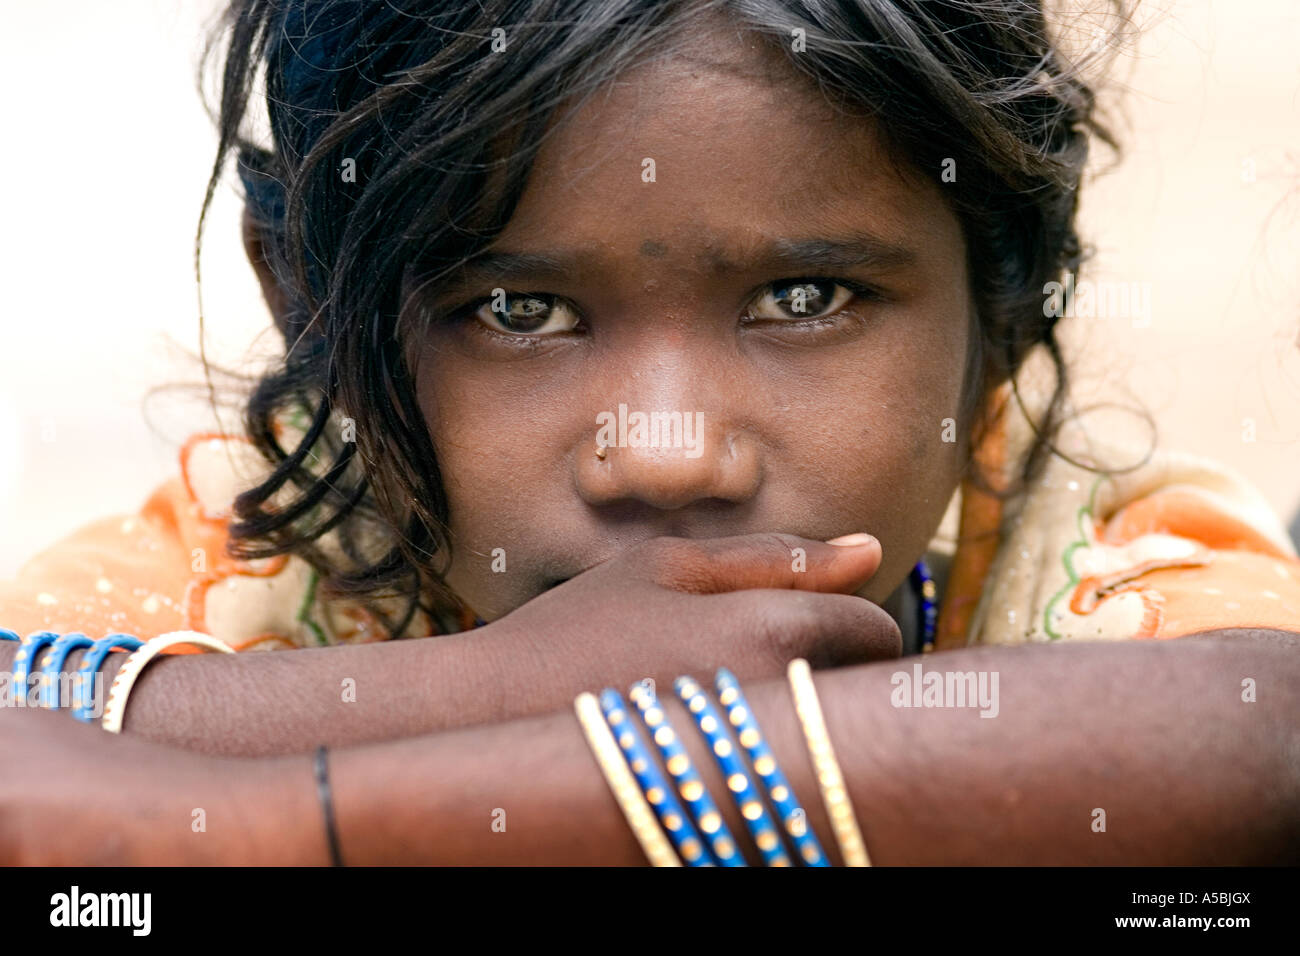 Little Indian street girl staring intensely into camera. Selective focus. Stock Photo